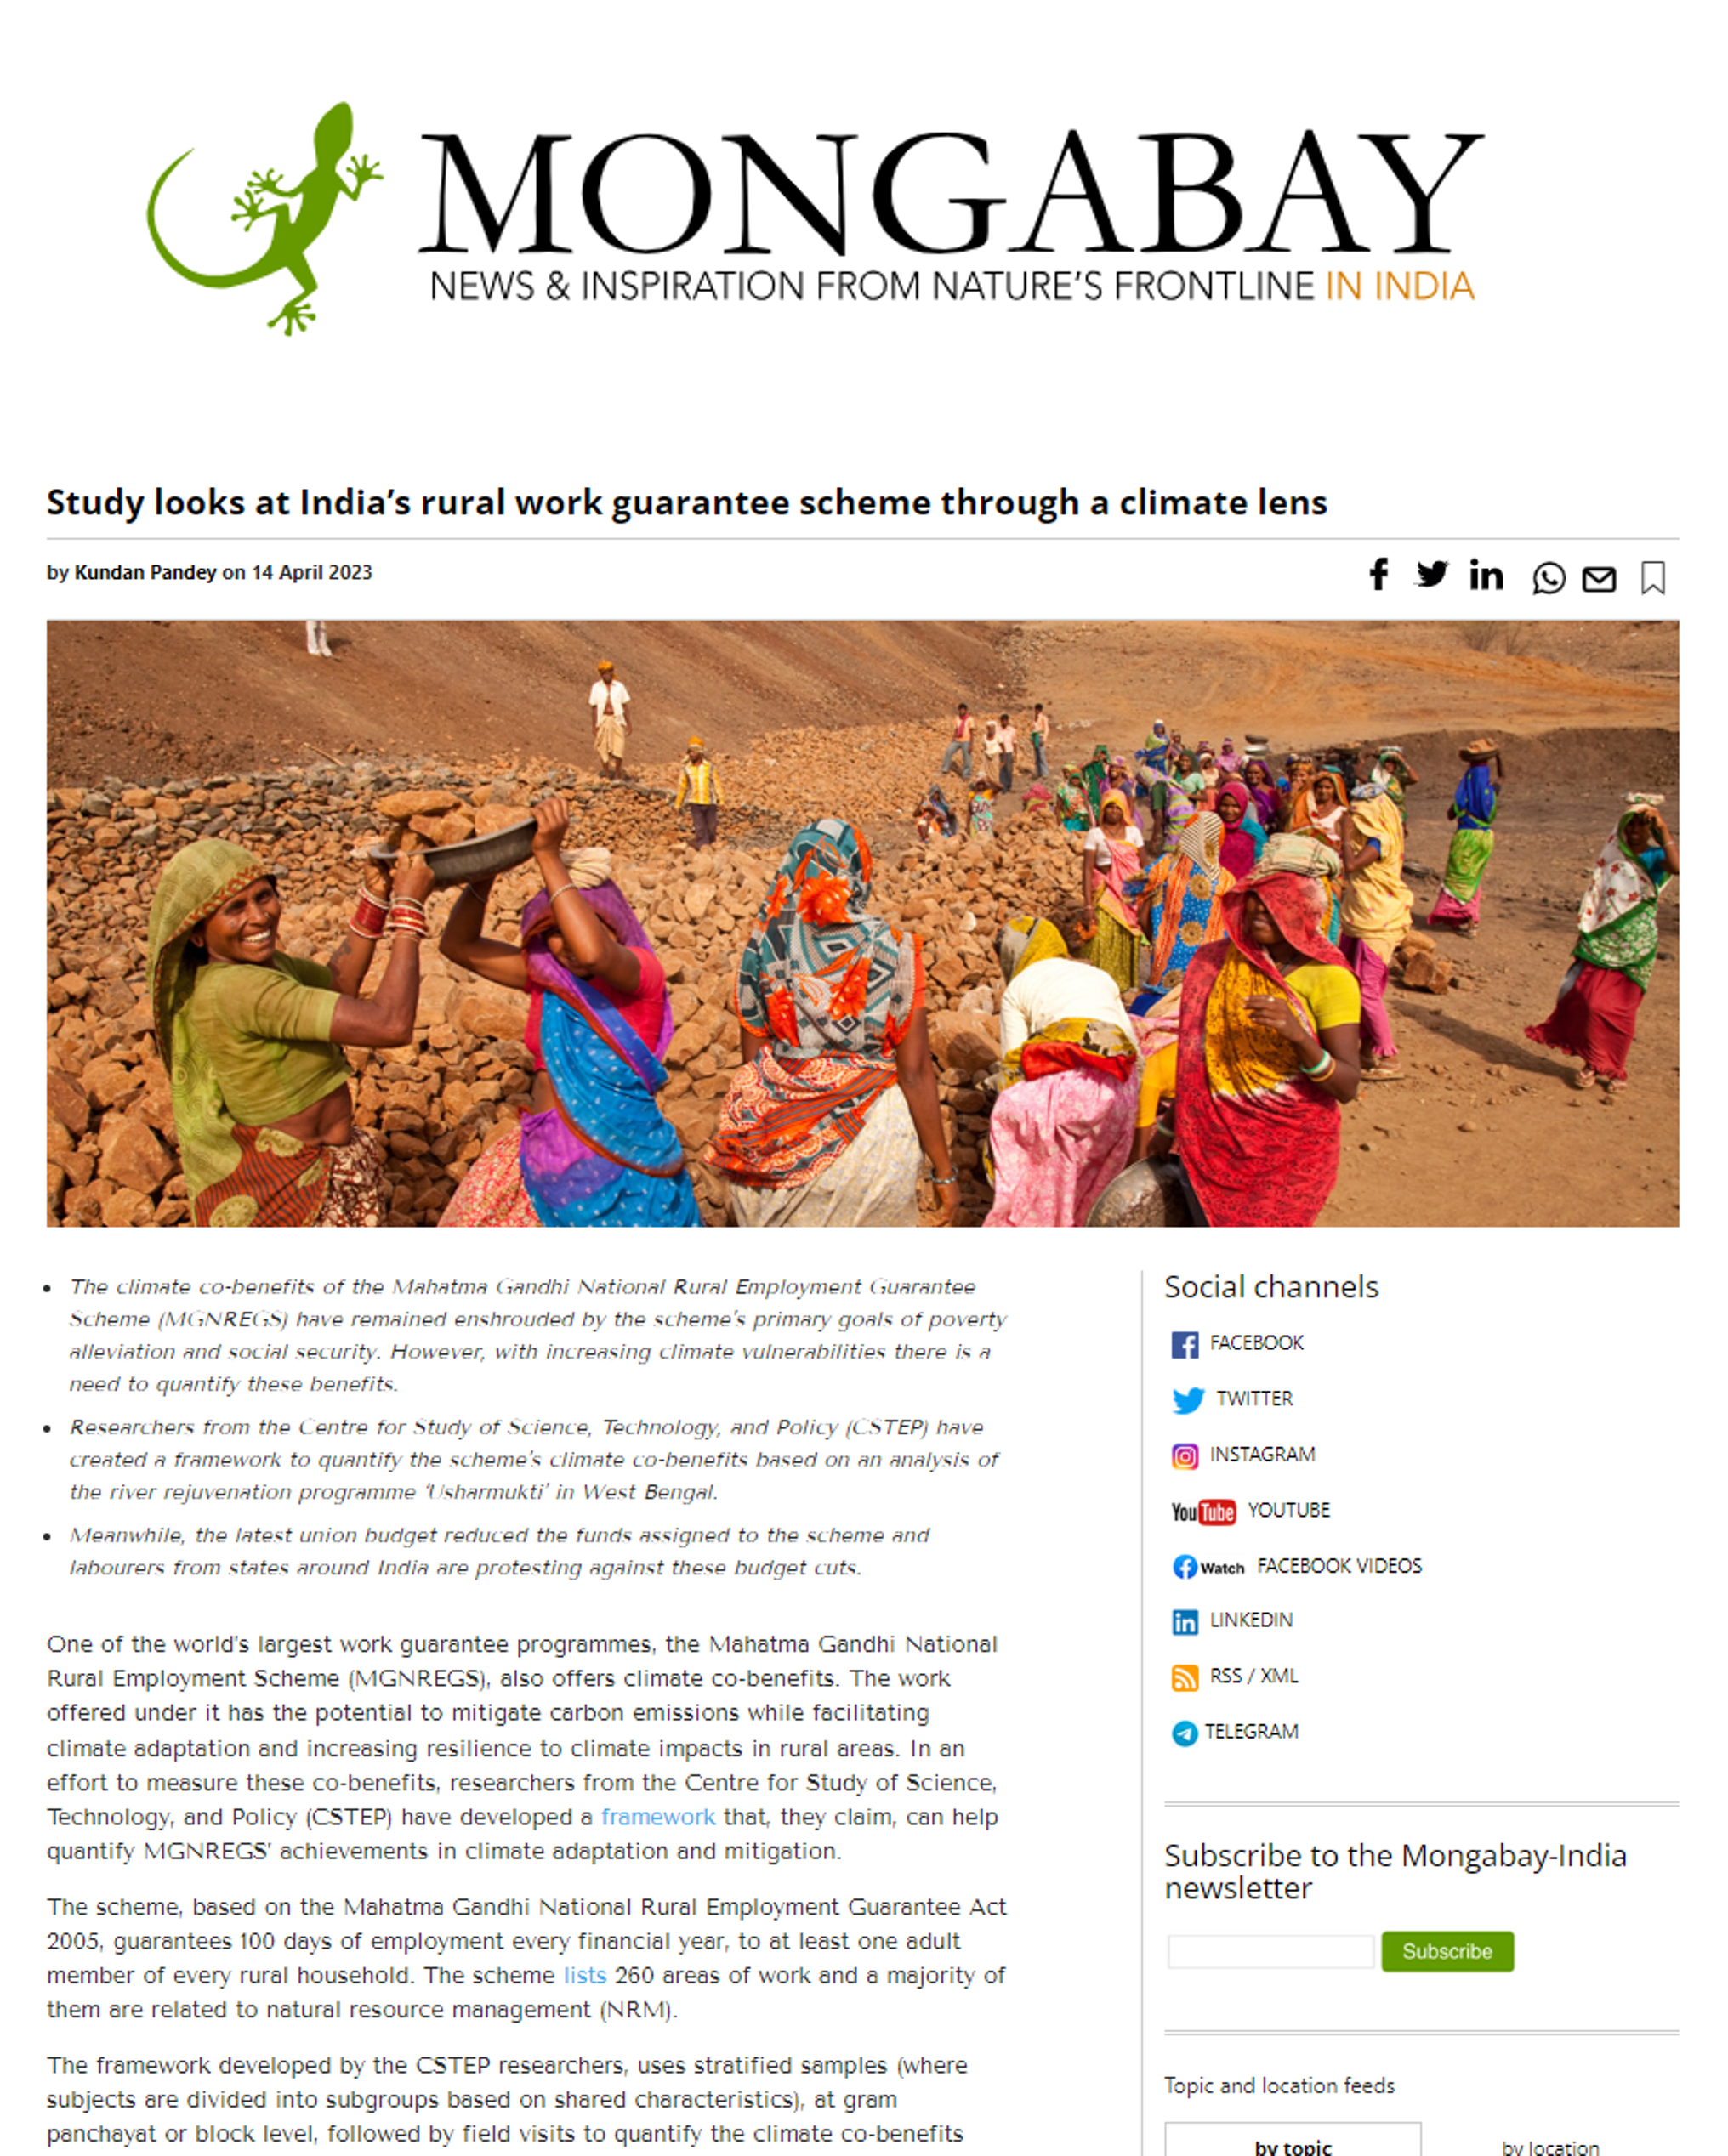 CSTEP’s study mentioned in and Tashina Madappa quoted by Mongabay on the climate co-benefits of MGNREGS